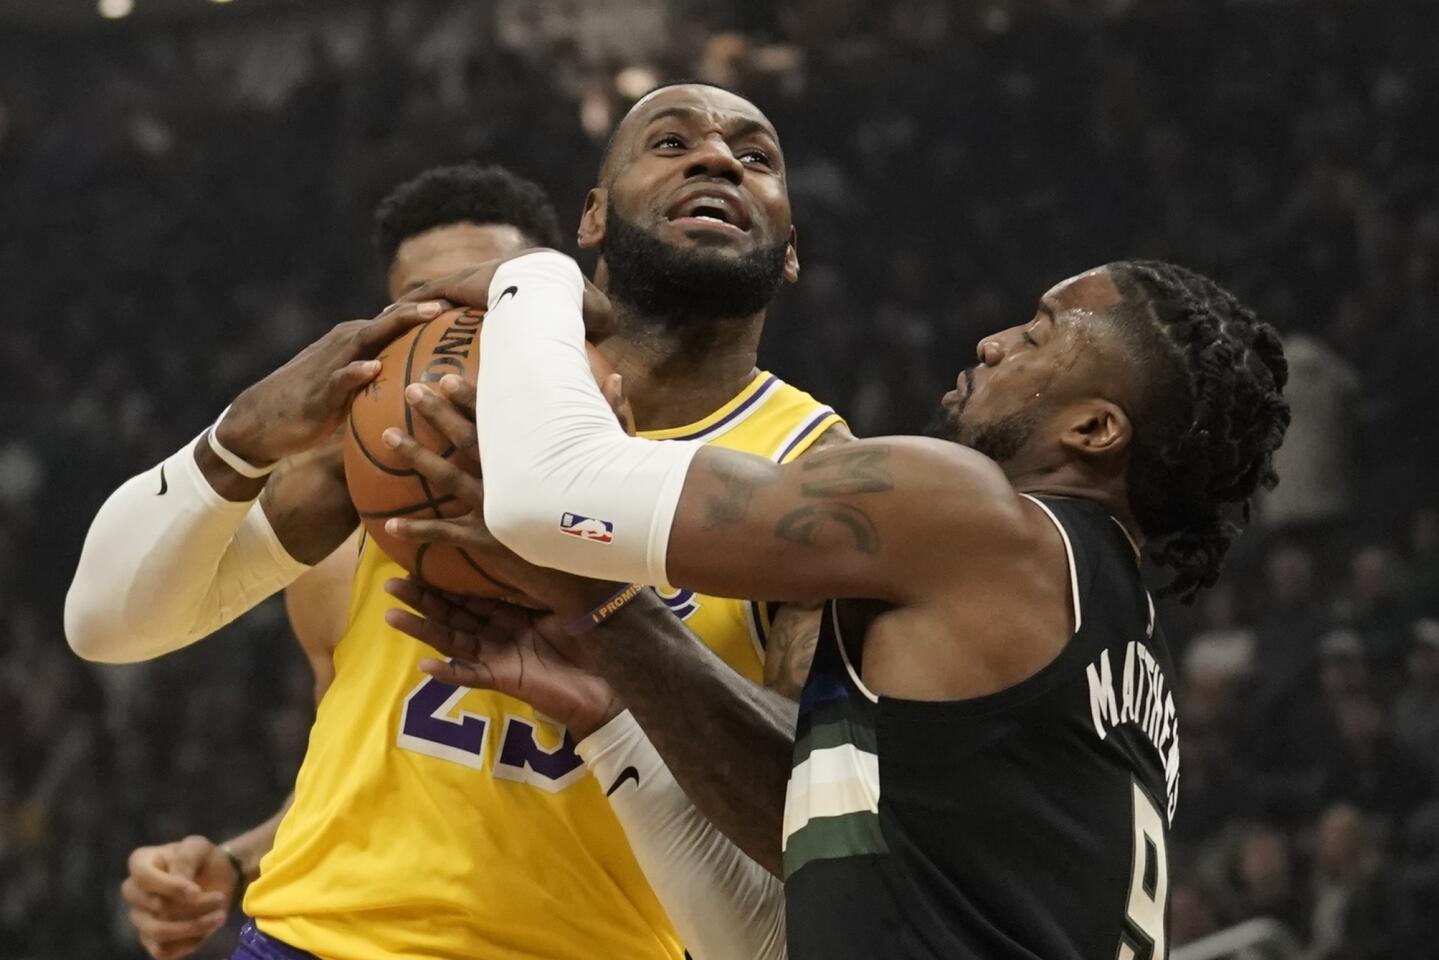 Bucks guard Wesley Matthews wraps up Lakers forward LeBron James during the first half of a game Dec. 19.